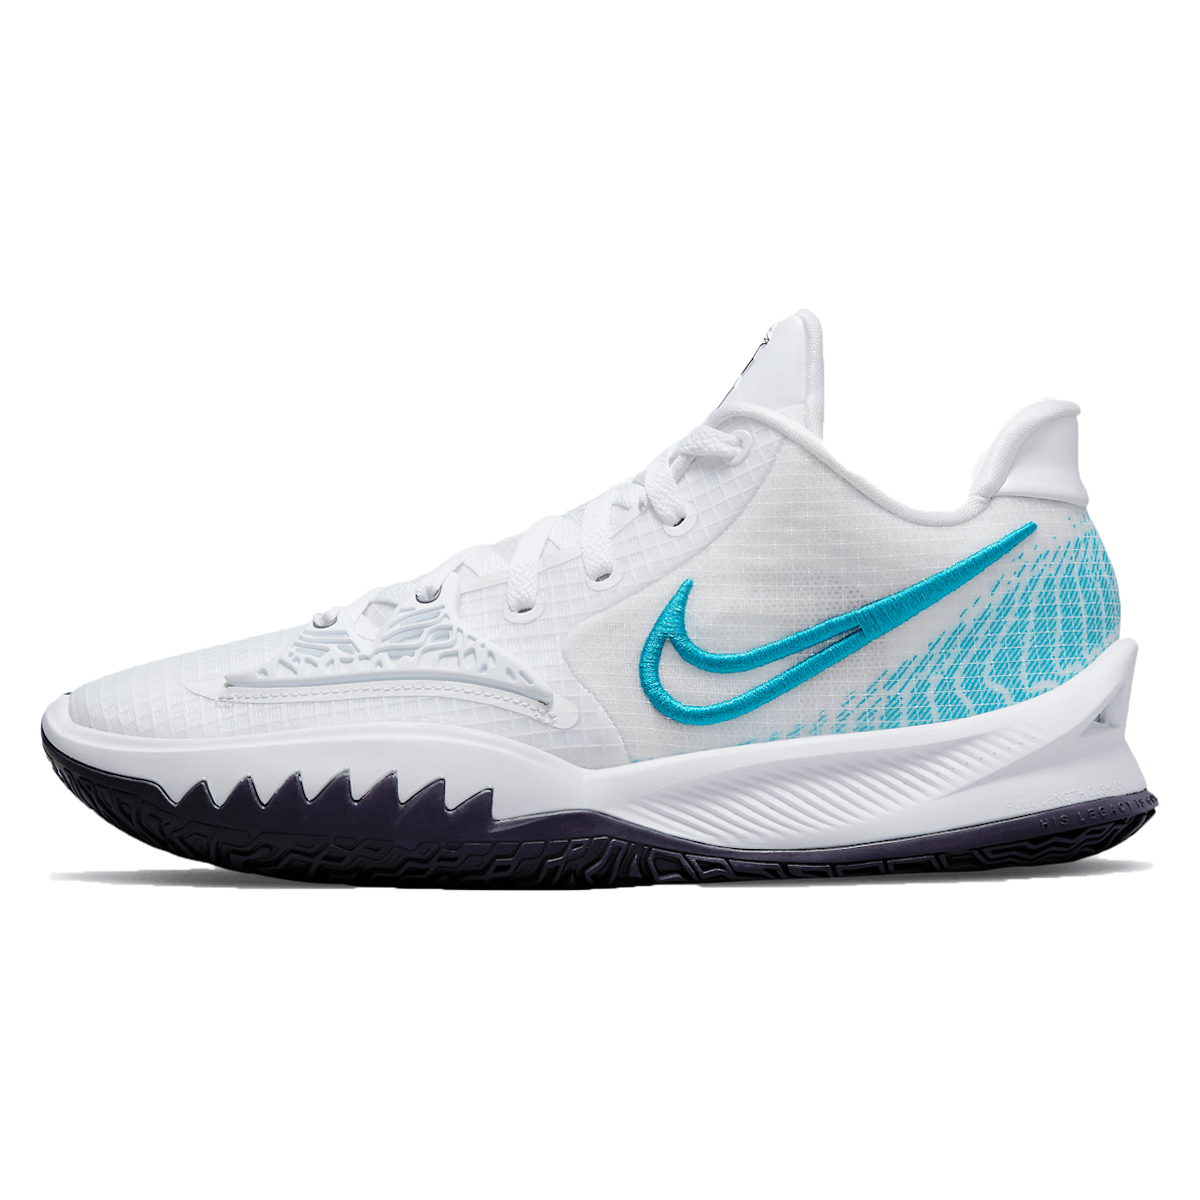 Nike Kyrie Low 4 White Laser Blue